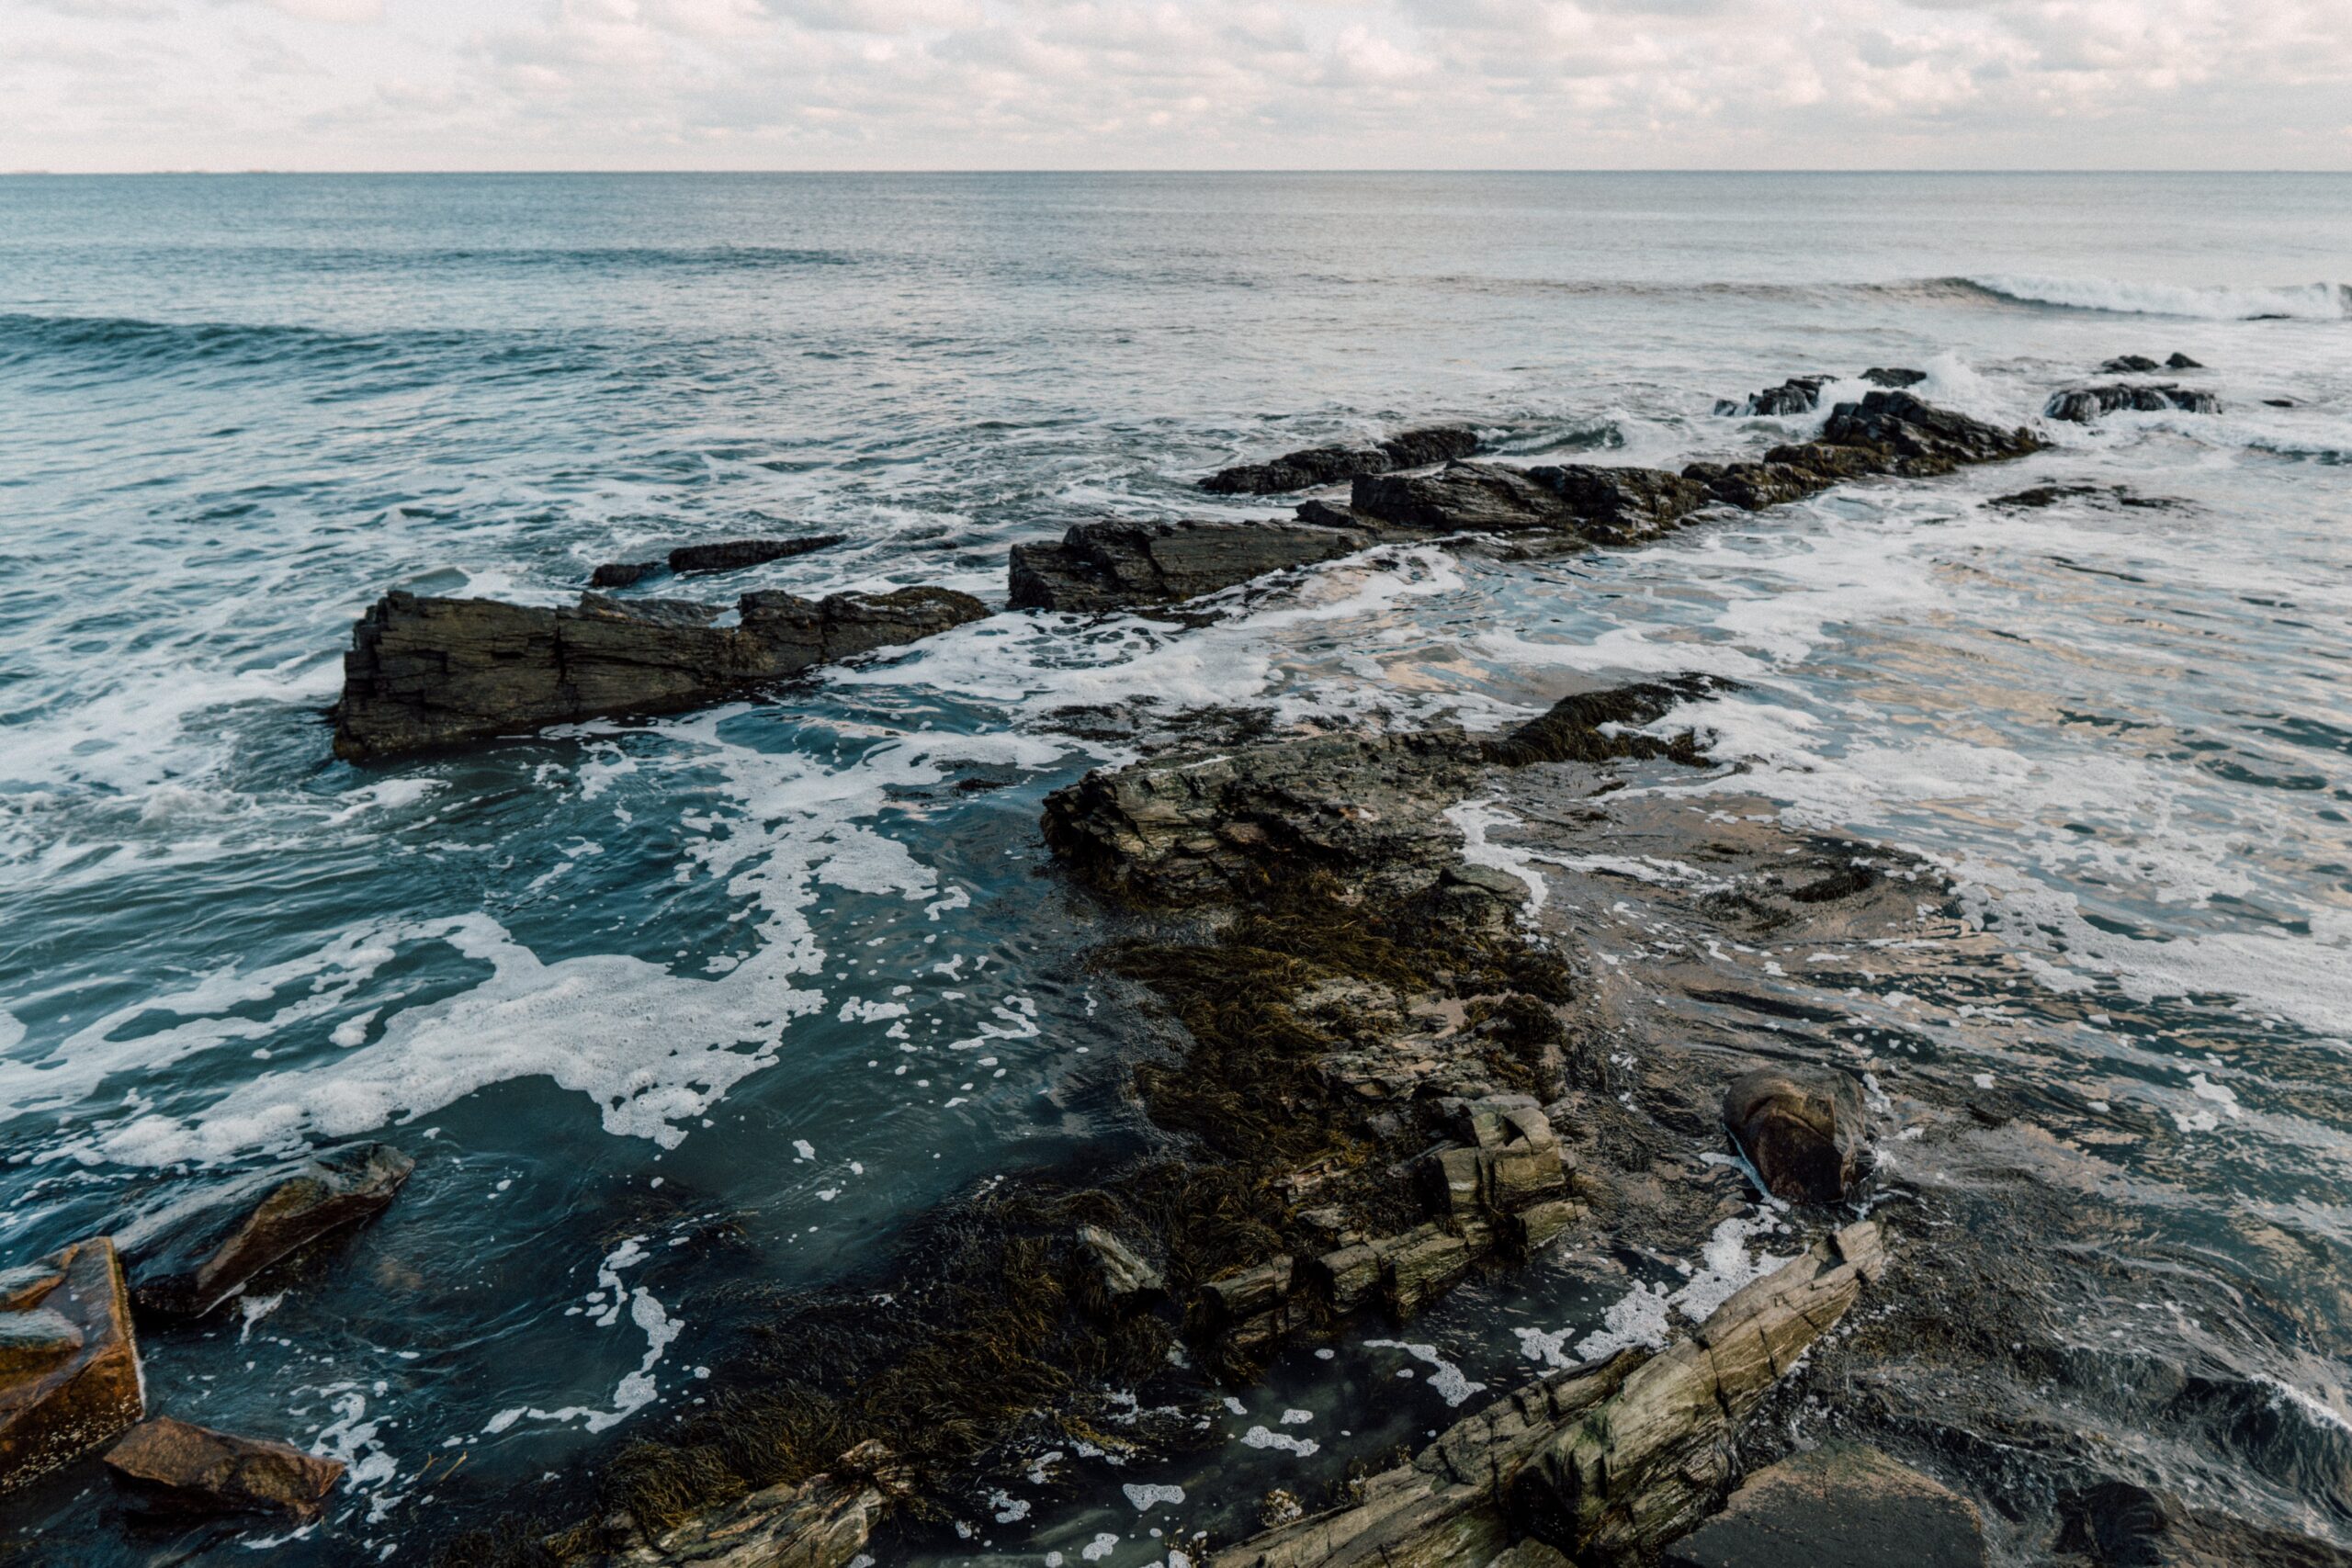 Rhode Island is a seaside state of New England that many travelers should explore on a road trip.
pictured: The warm blue waters of Rhode Island waving over black beach rocks 